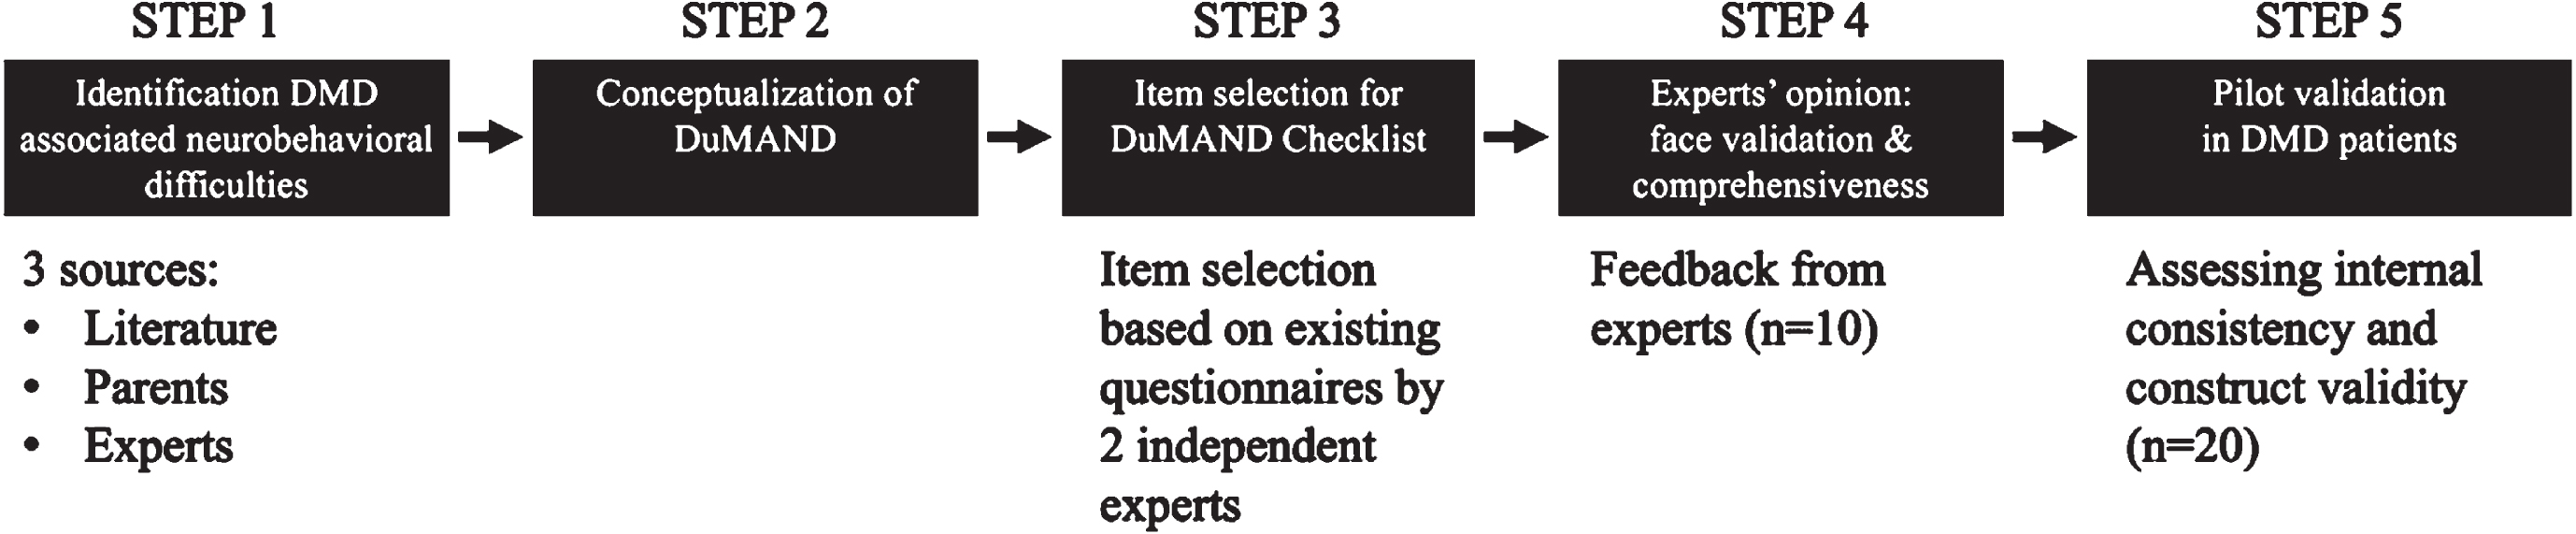 Overview of different steps for the conceptualization of DuMAND and the development of the DuMAND Checklist.